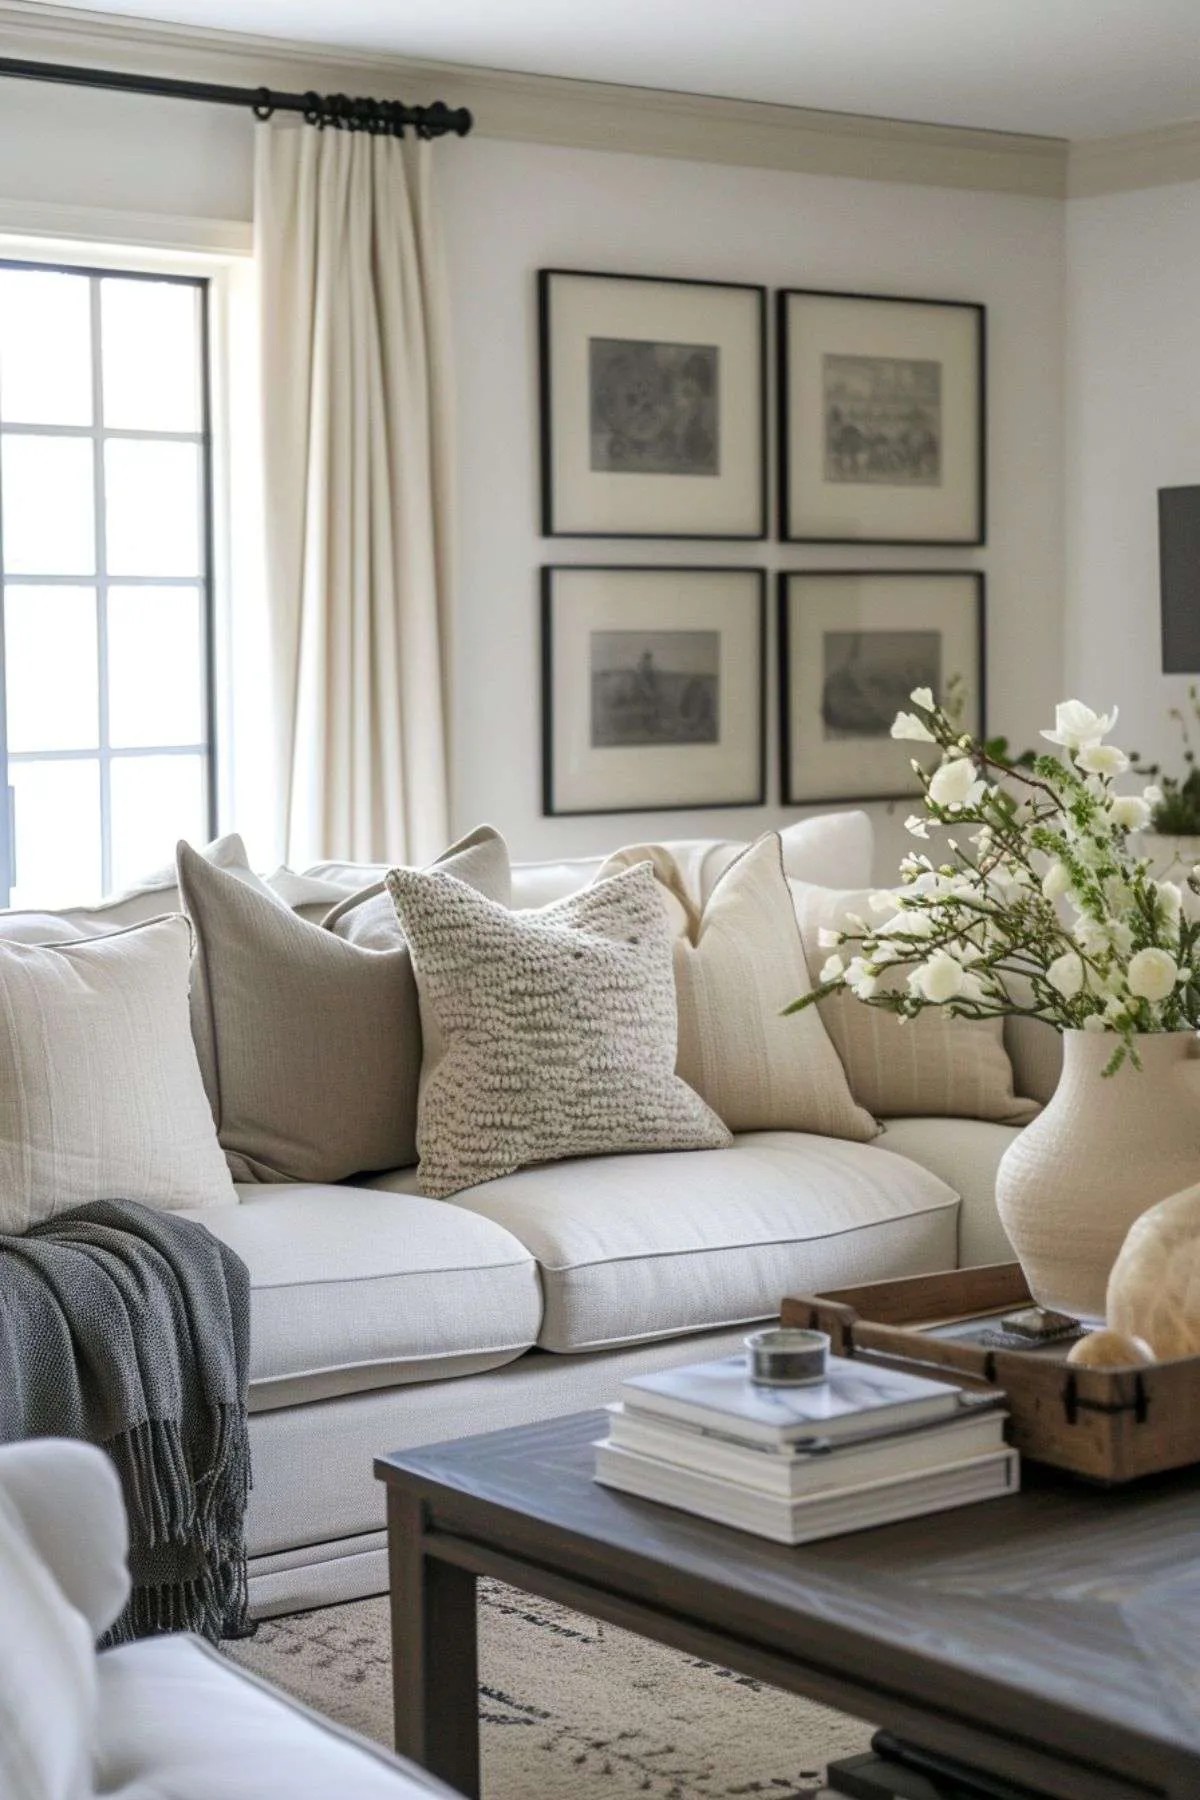 How to Use a Monochromatic Theme to Create a Beautiful Home